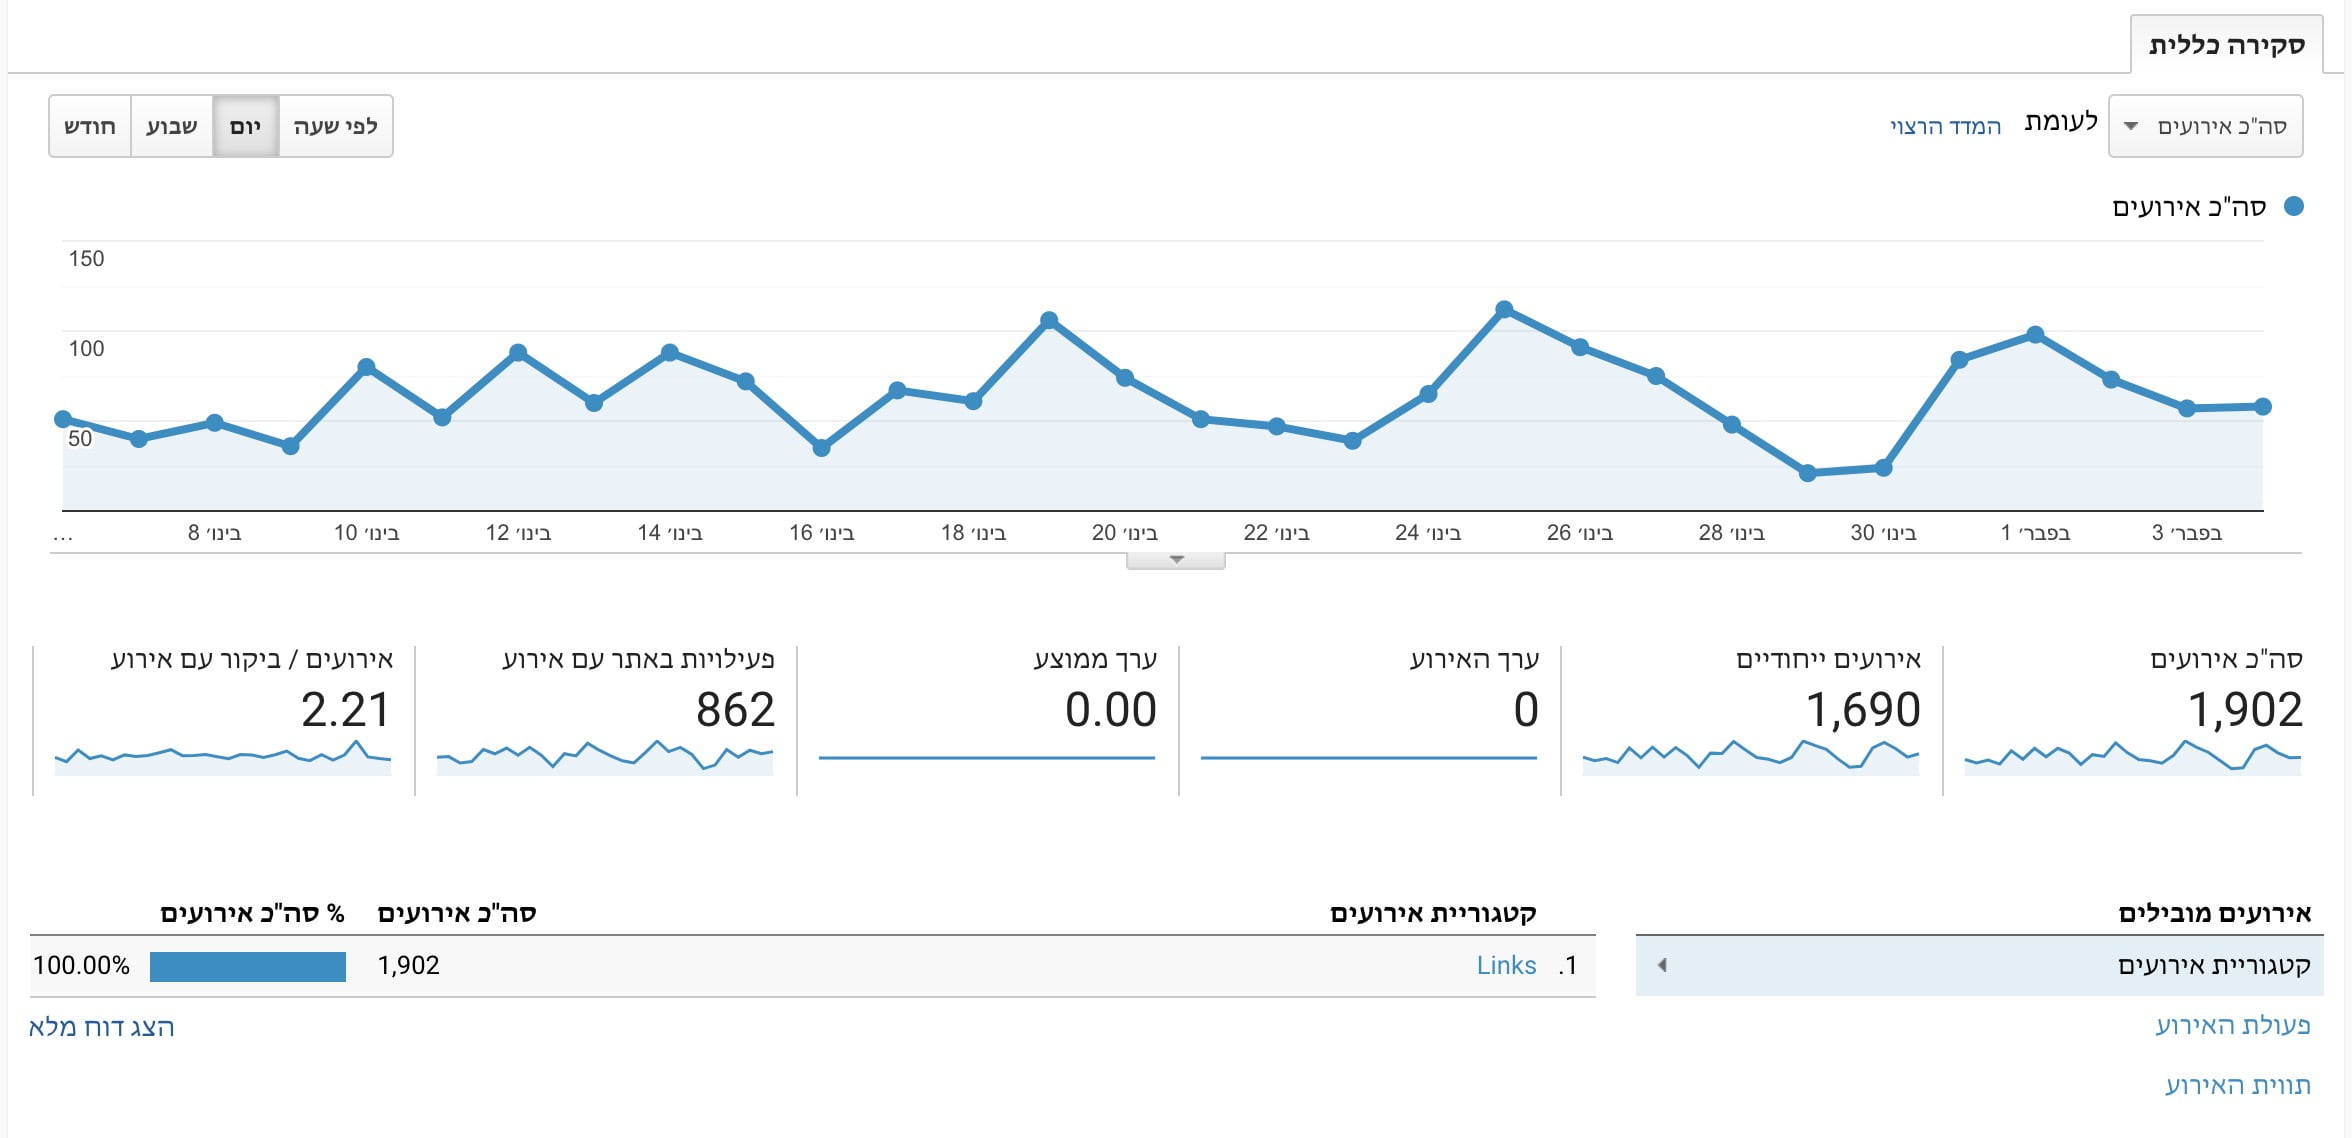 Overview of events in Google Analytics